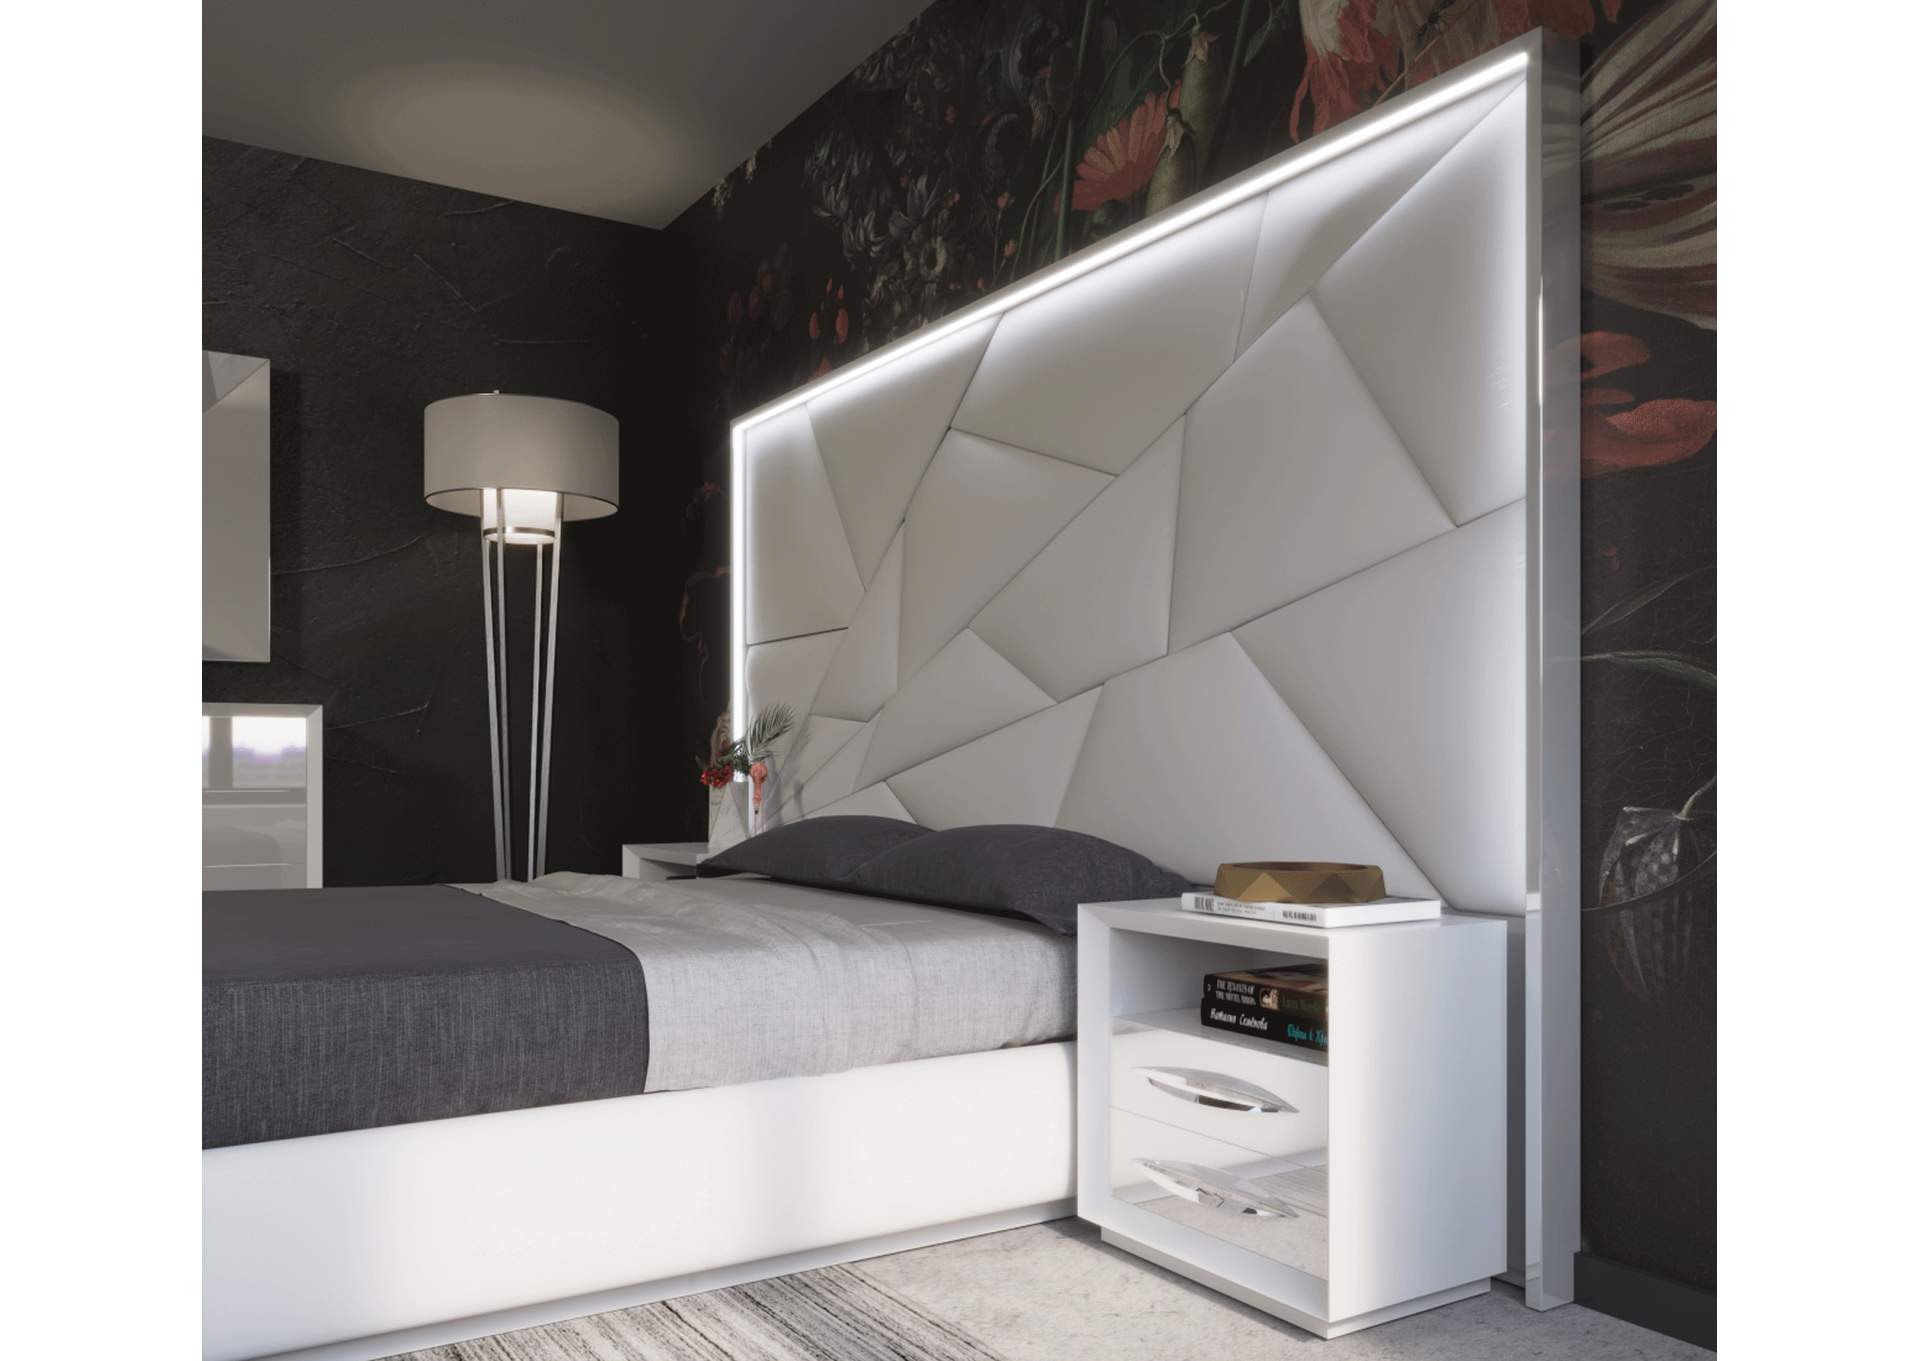 Majesty Bedroom with Light And Carmen Cases SET,ESF Wholesale Furniture